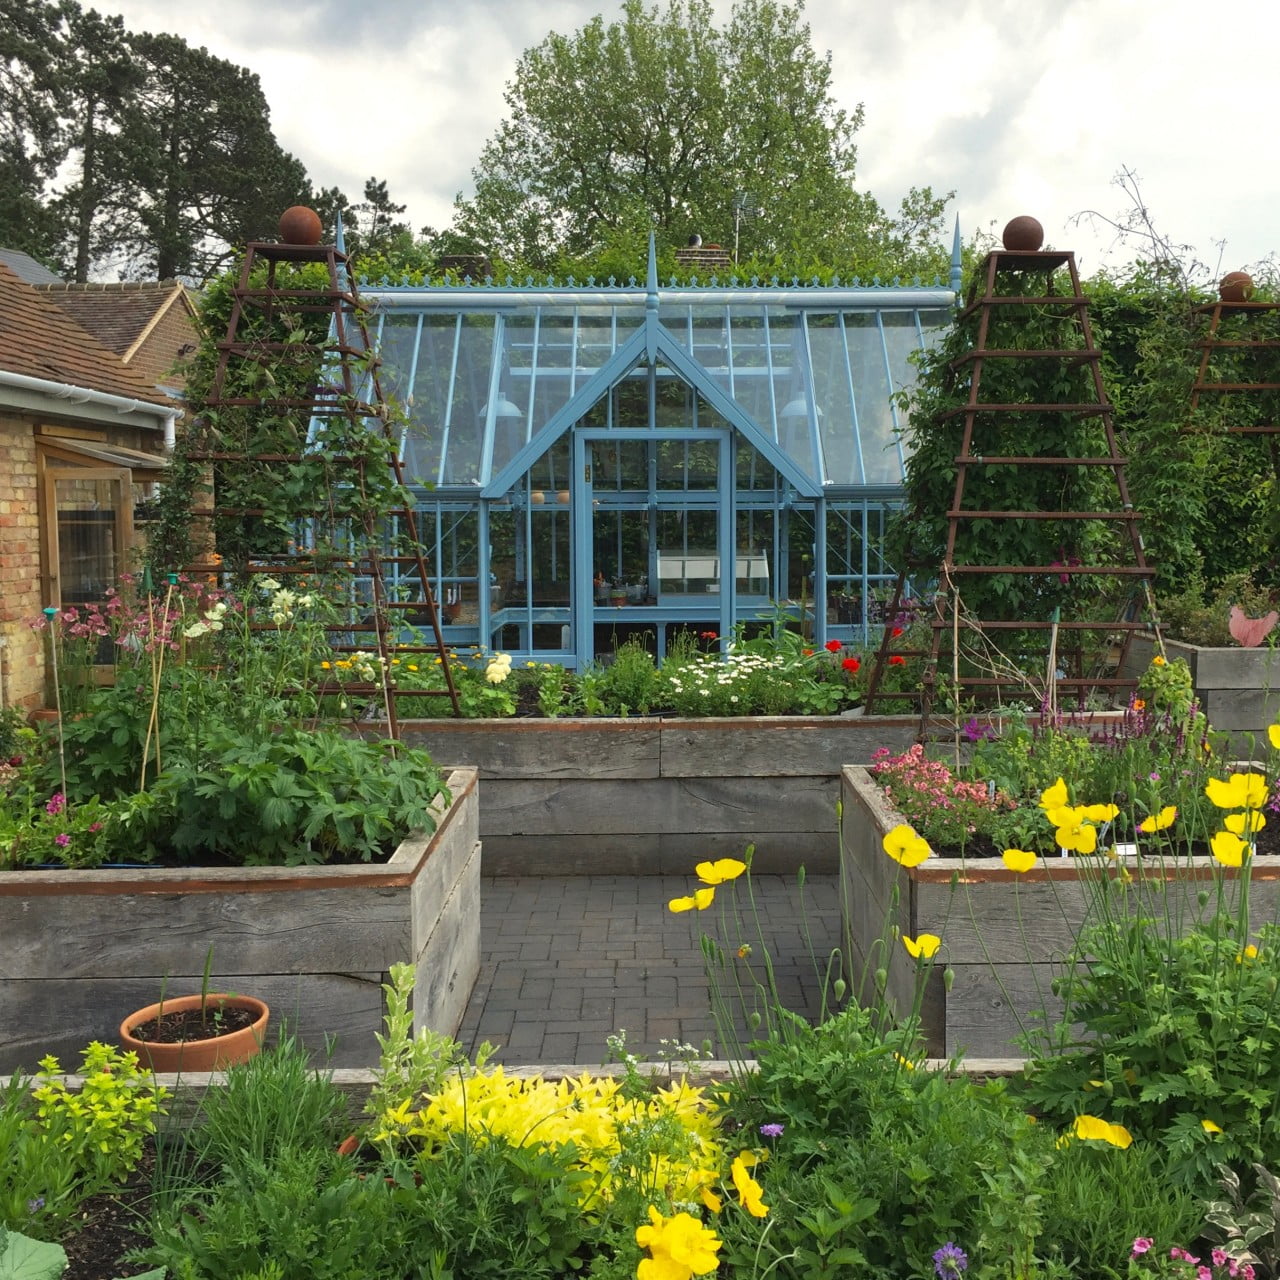 This is my client Janes' kitchen garden with new blue greenhouse